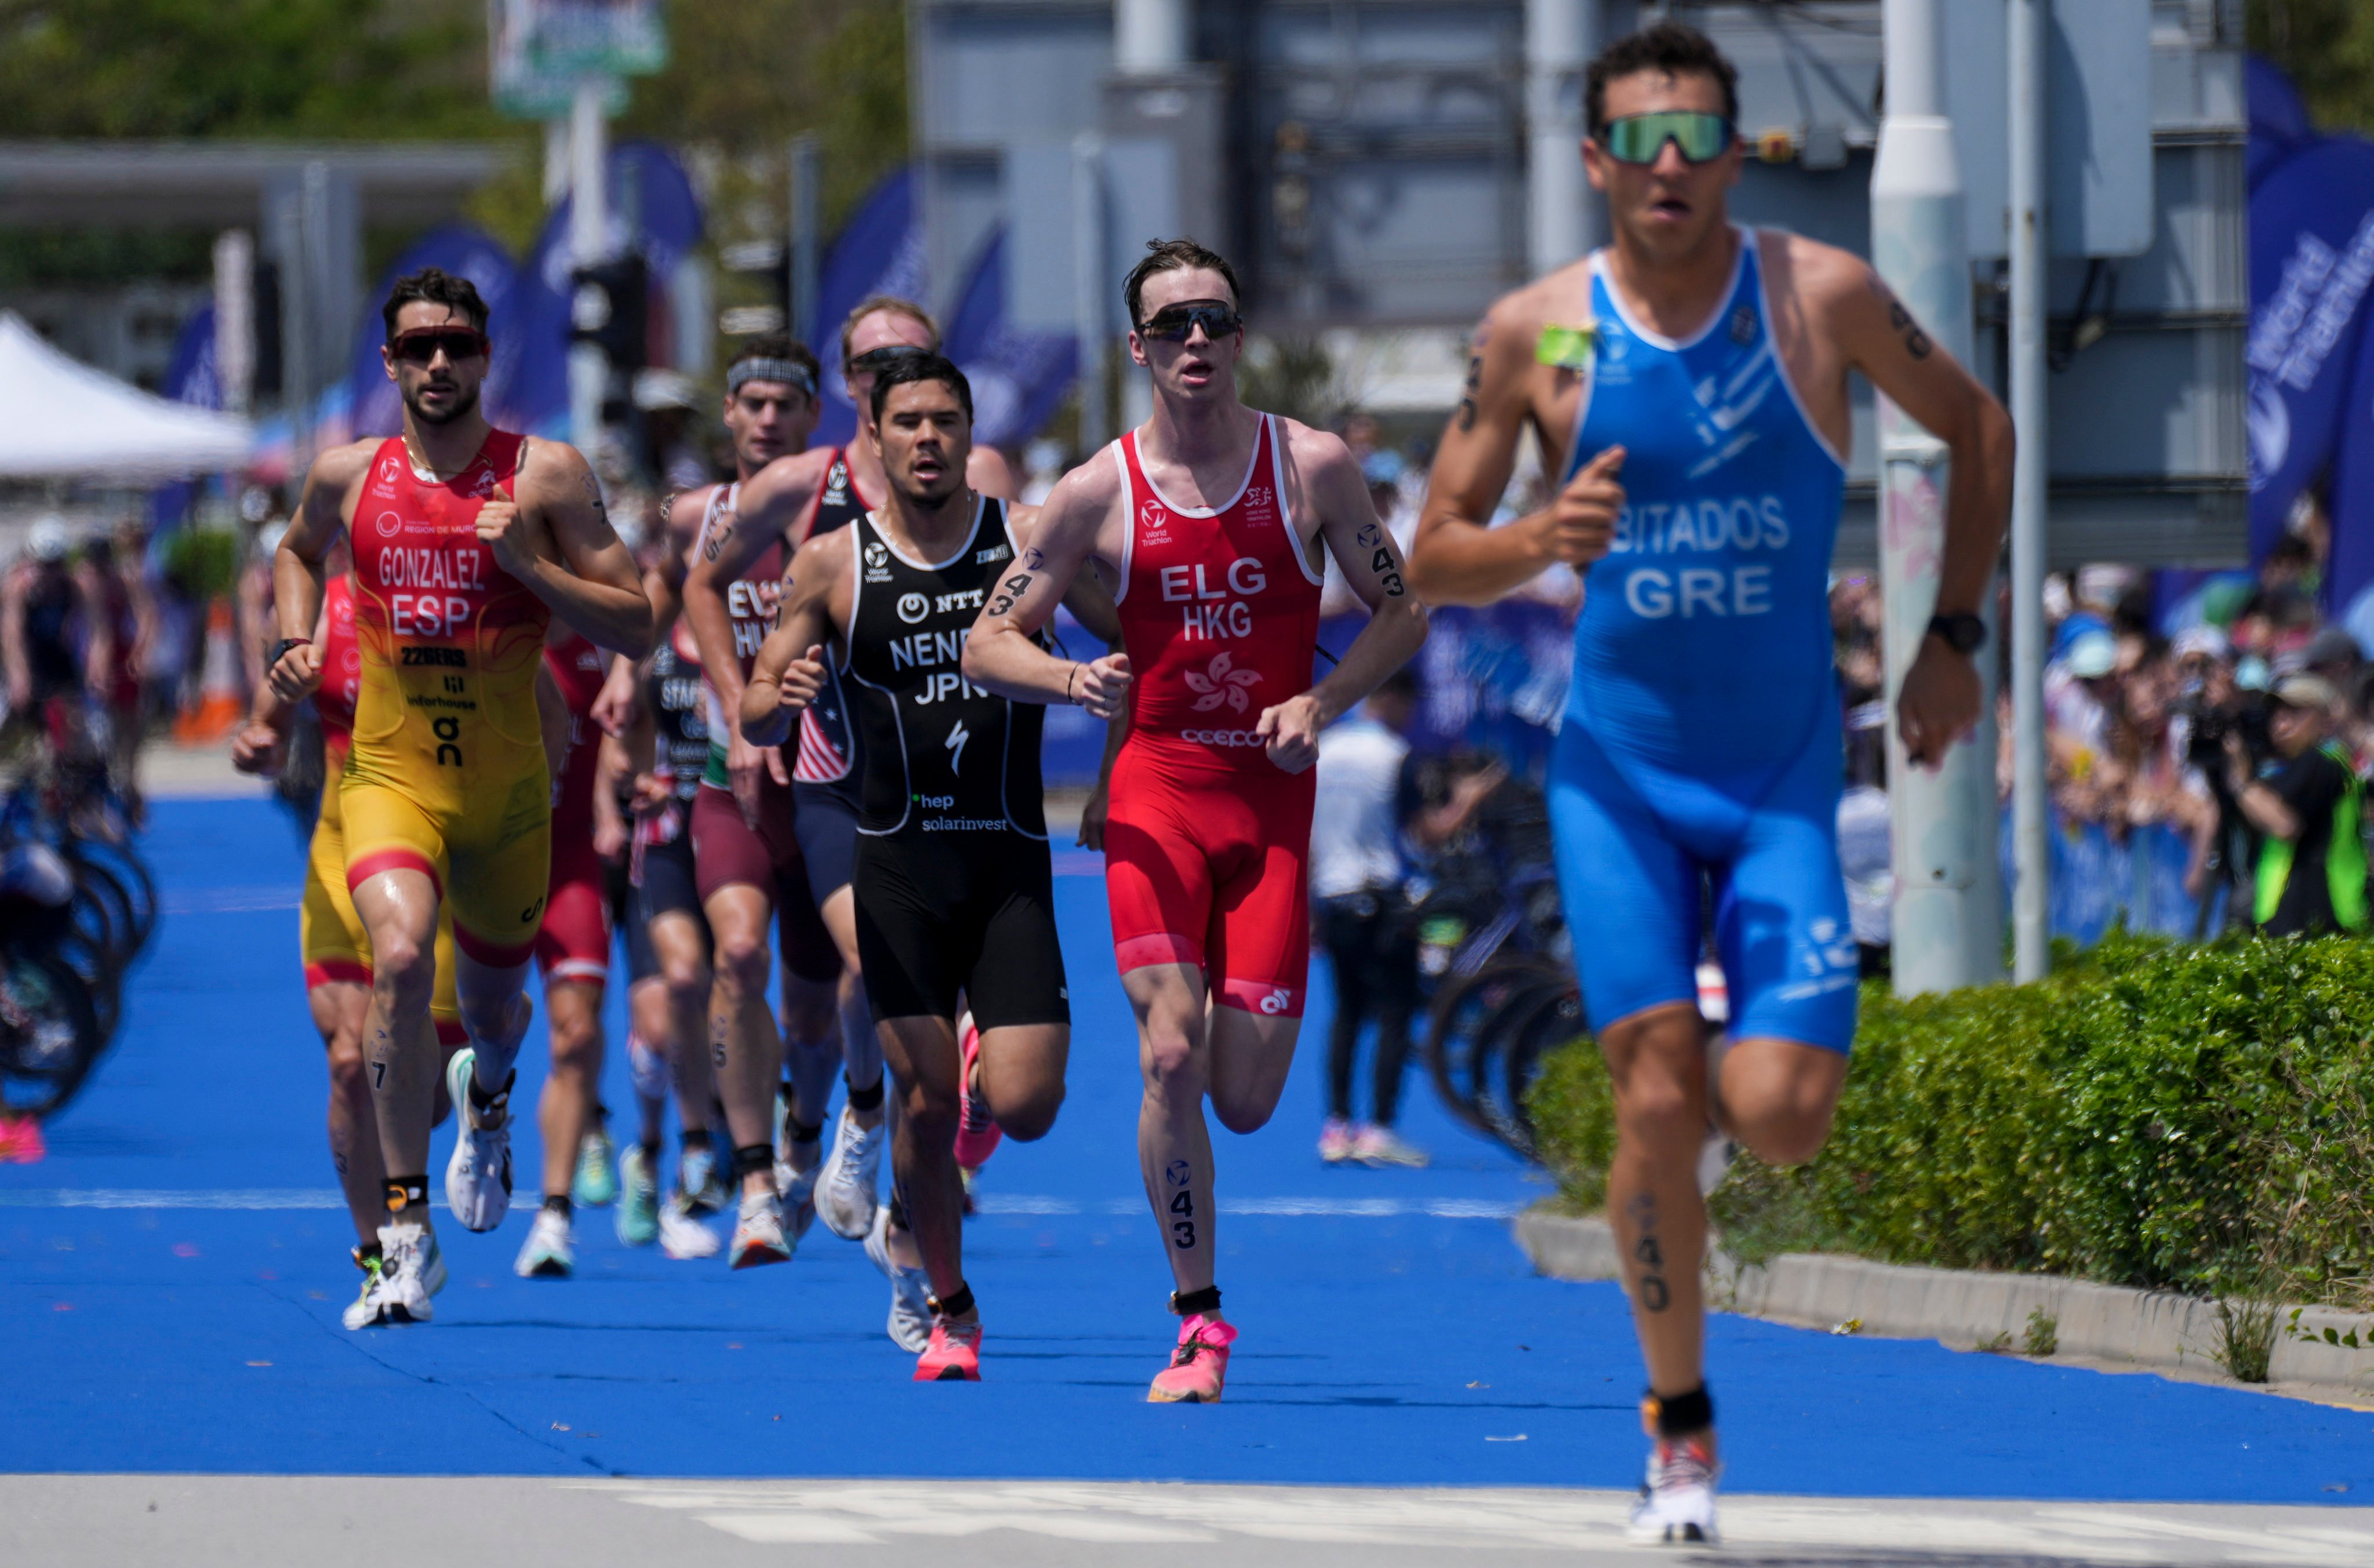 Hong Kong’s Robin Elg finished 23rd in the men’s elite race at the Triathlon World Cup event in the city. Photo: Elson Li